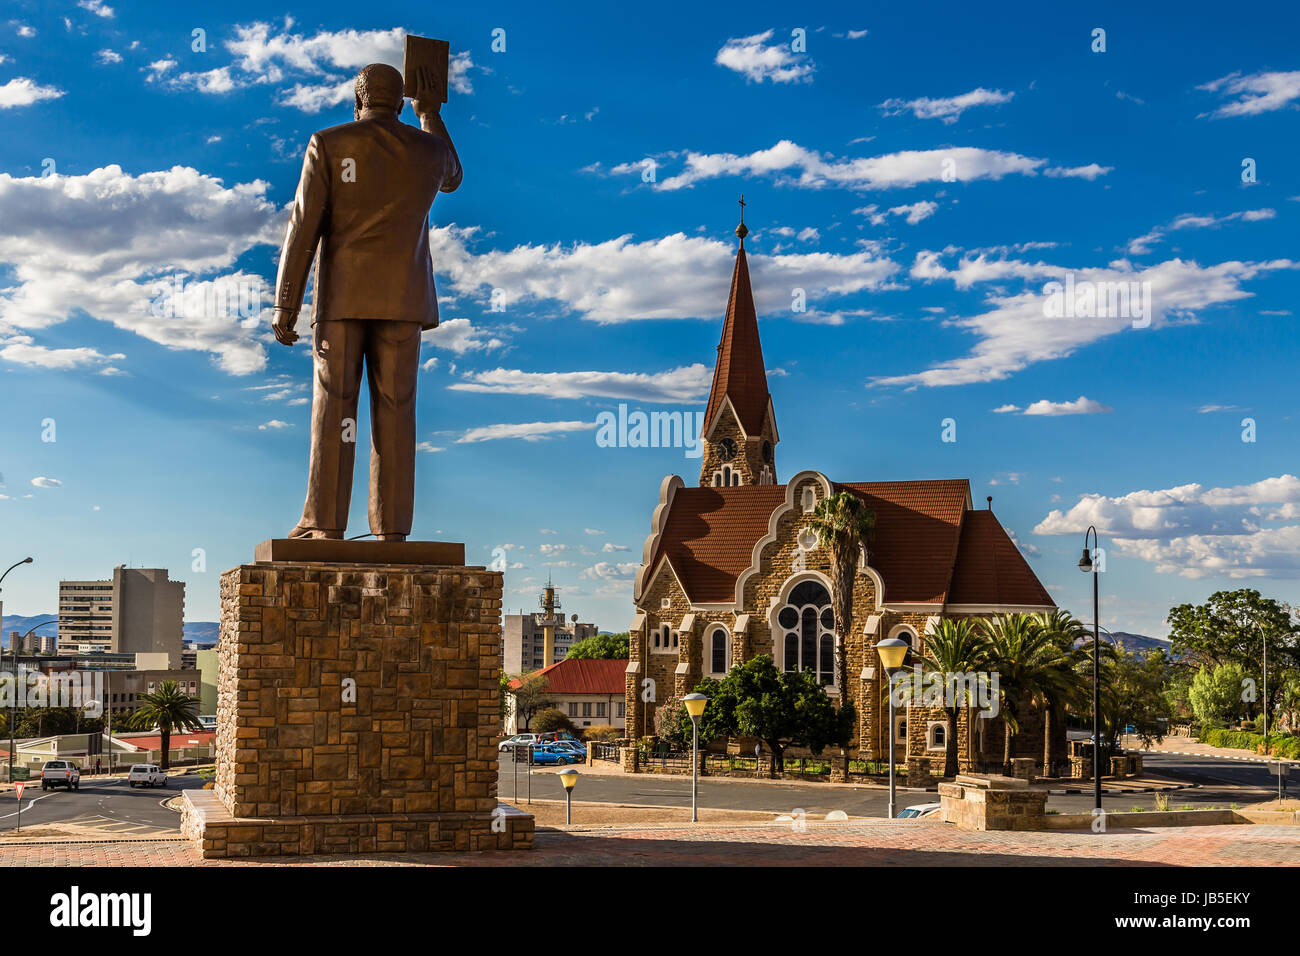 First Namibian President monument and Luteran Christ Church in the center of Windhoek, Namibia Stock Photo